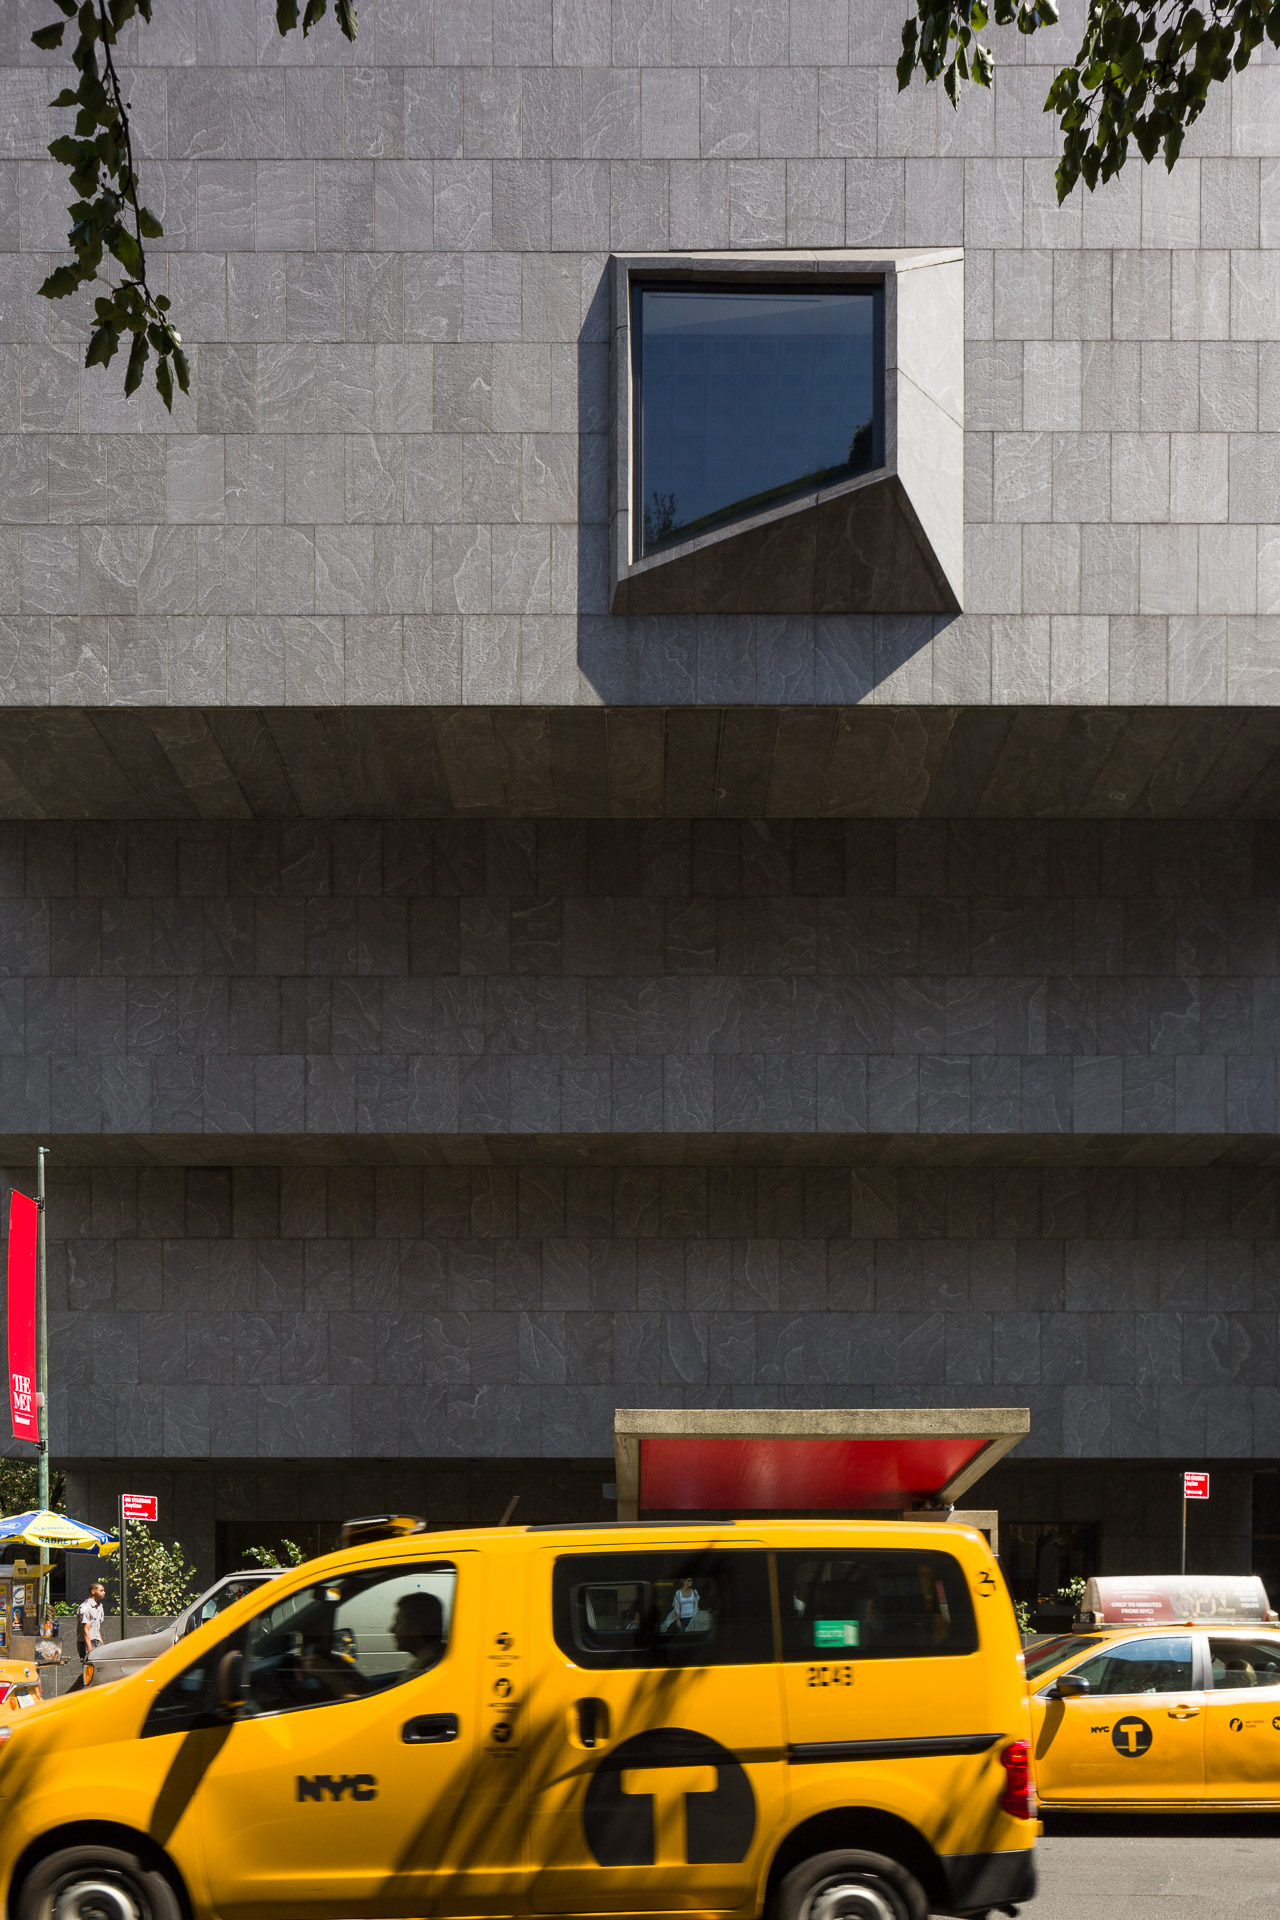 Met Breuer in New York, NY by Marcel Breuer. Photo by Jason R. Woods.